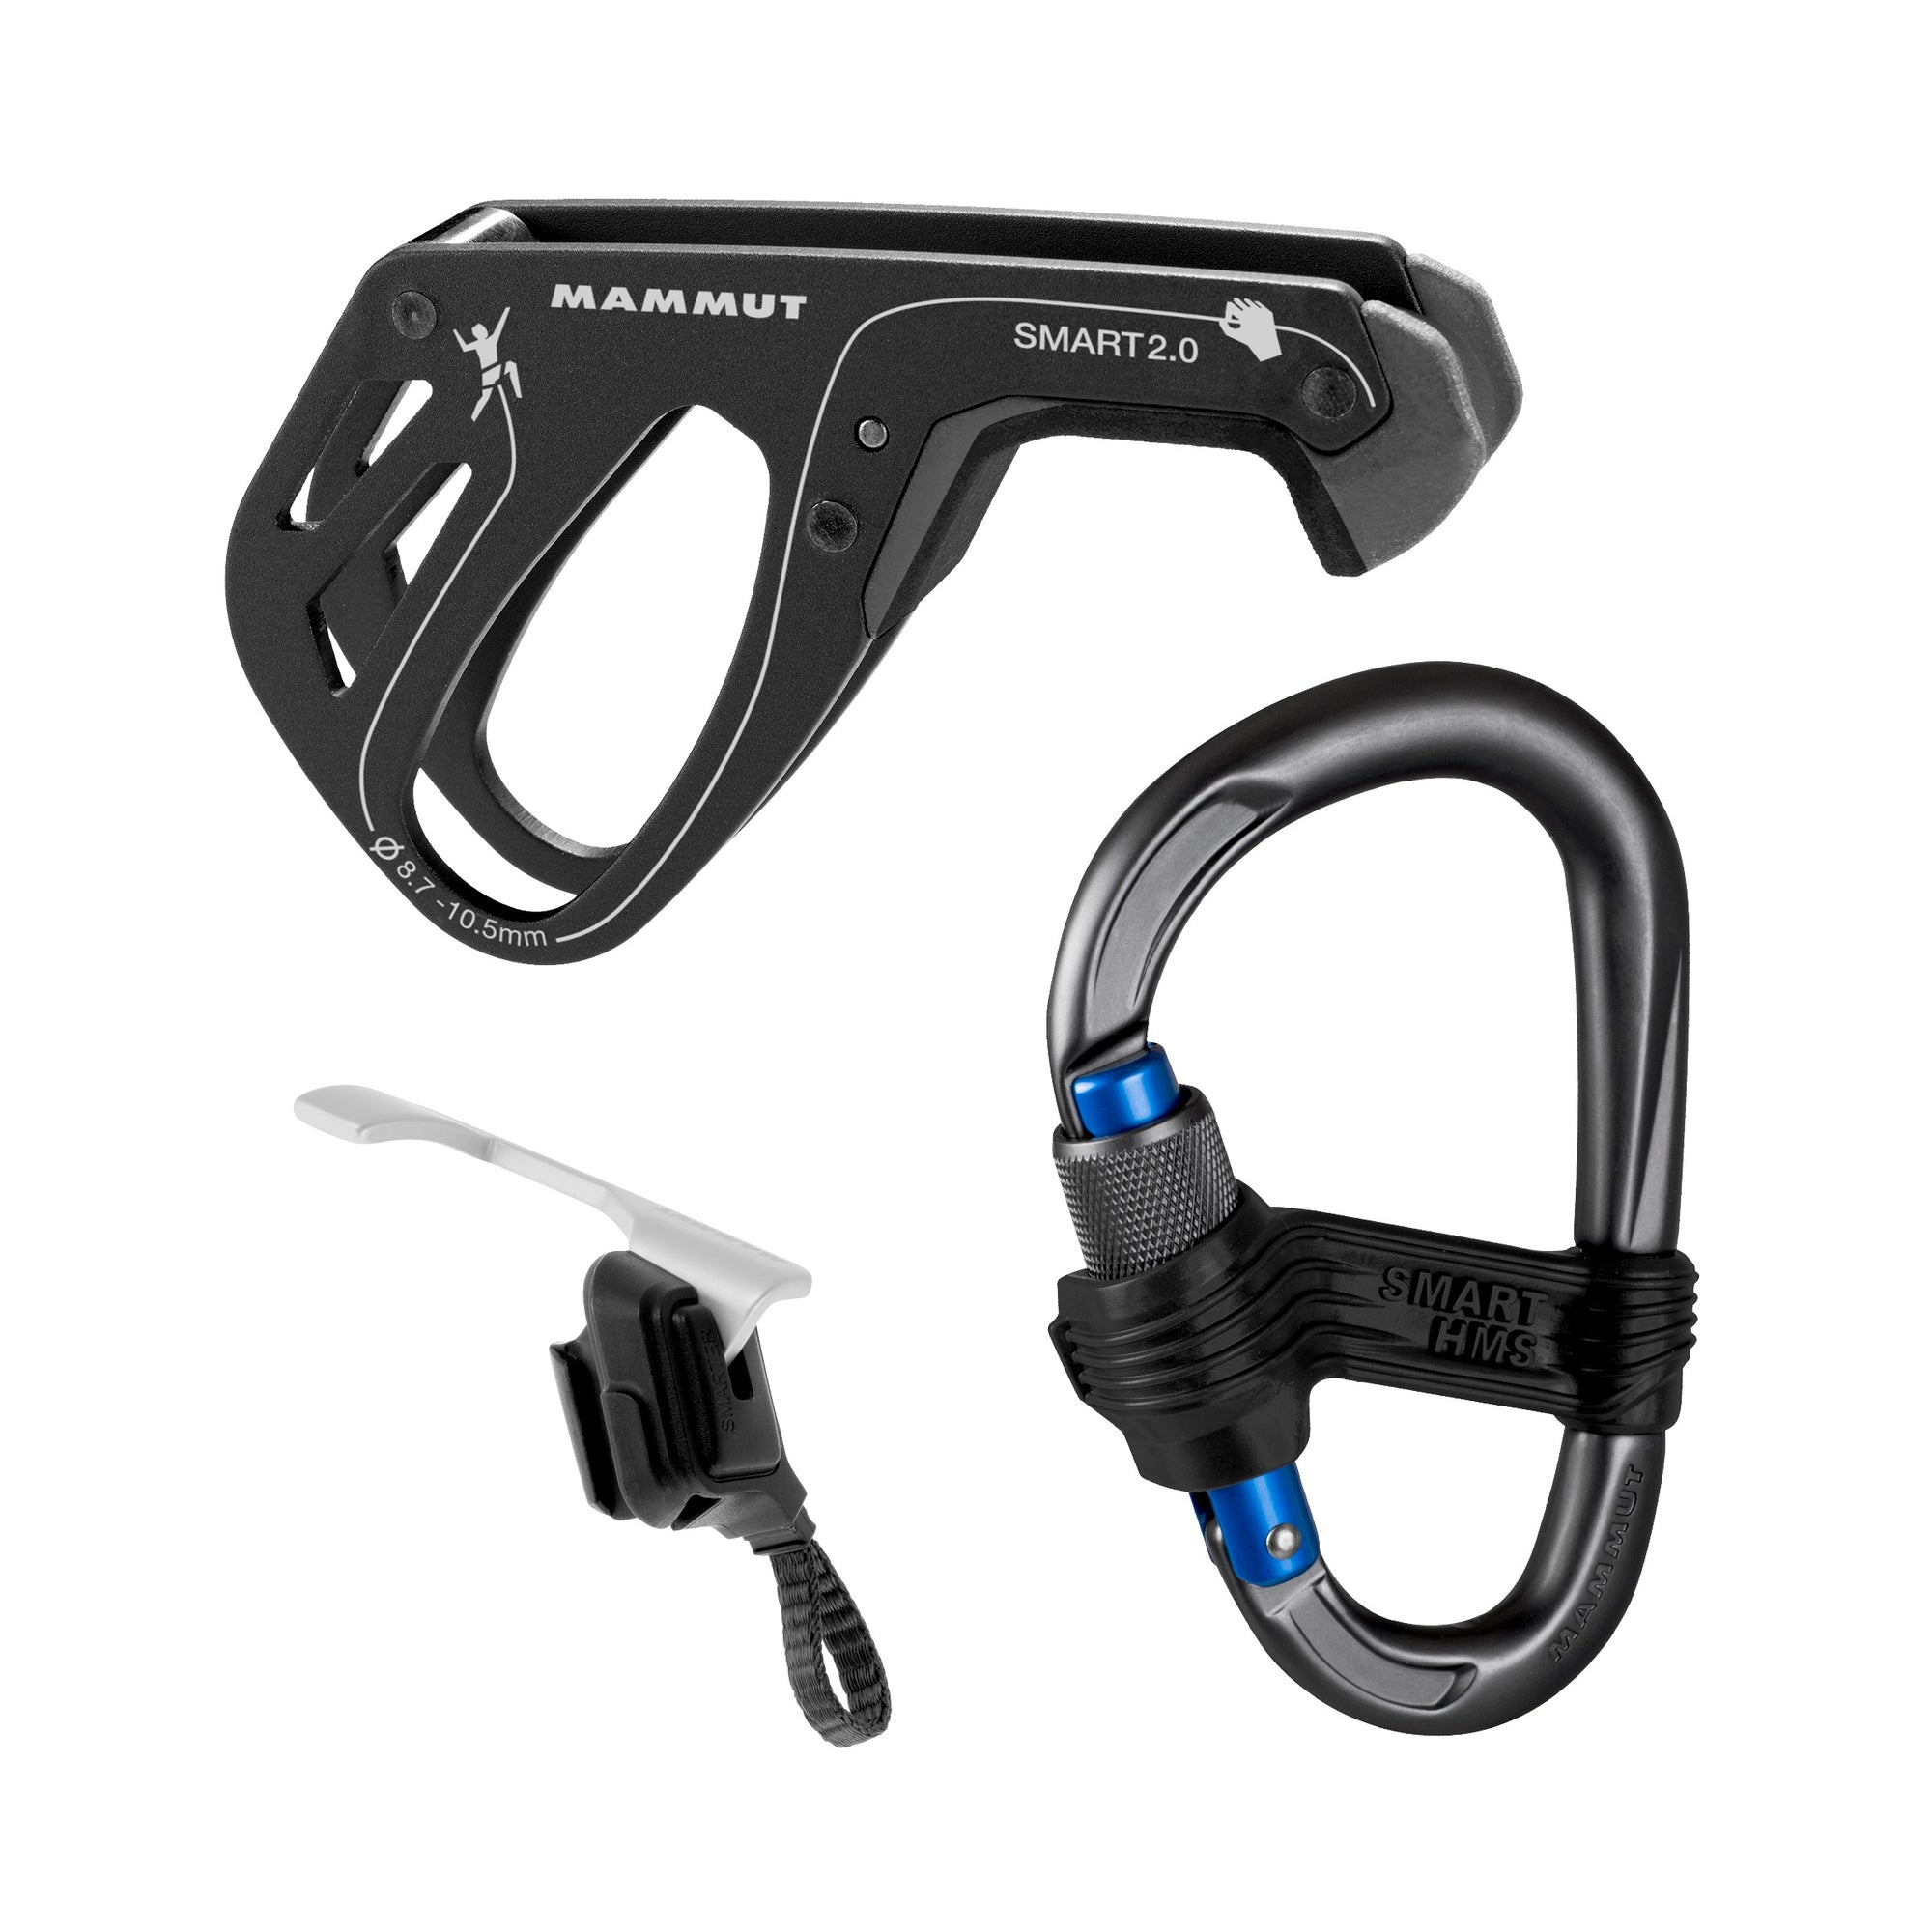 Mammut Smarter 2.0 Belay Package, showing the carabiner, belay device and safety gate individually